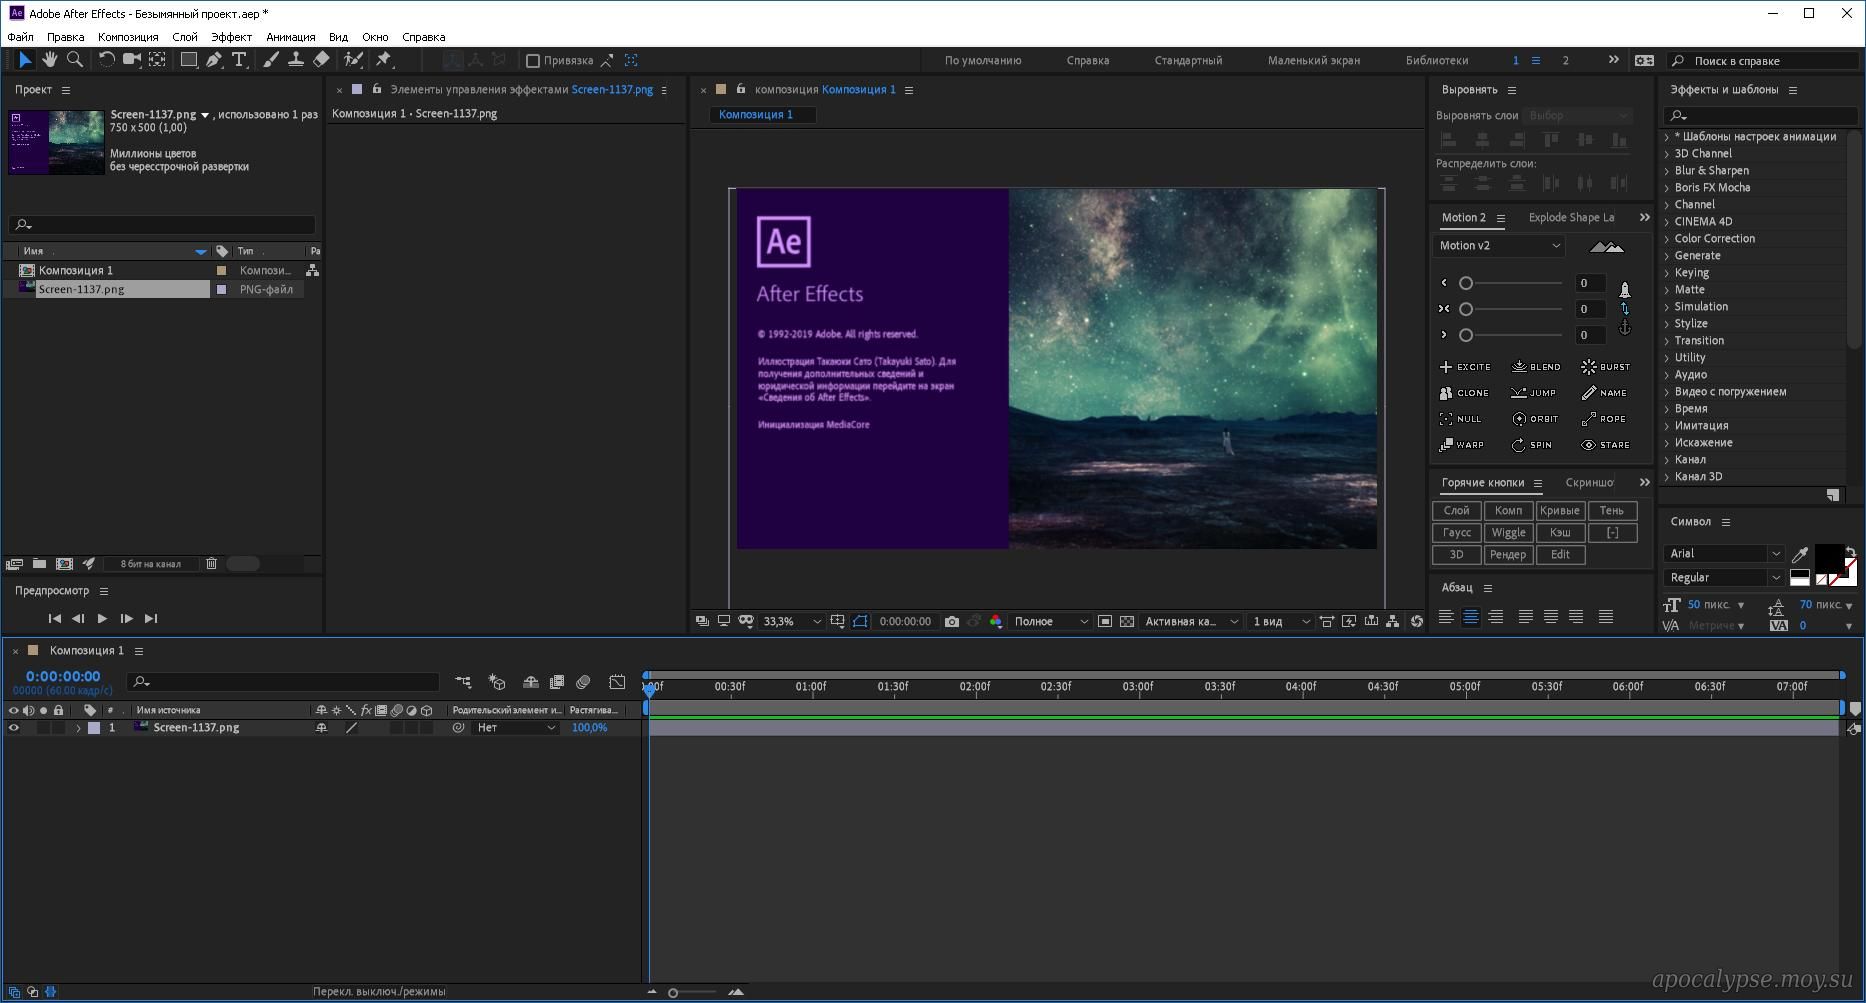 Adobe effects 2019. Adobe after Effects cc 2019. Интерфейс Adobe after Effects 2019. Adobe after Effects cc 2021. Интерфейс after Effects 2020.